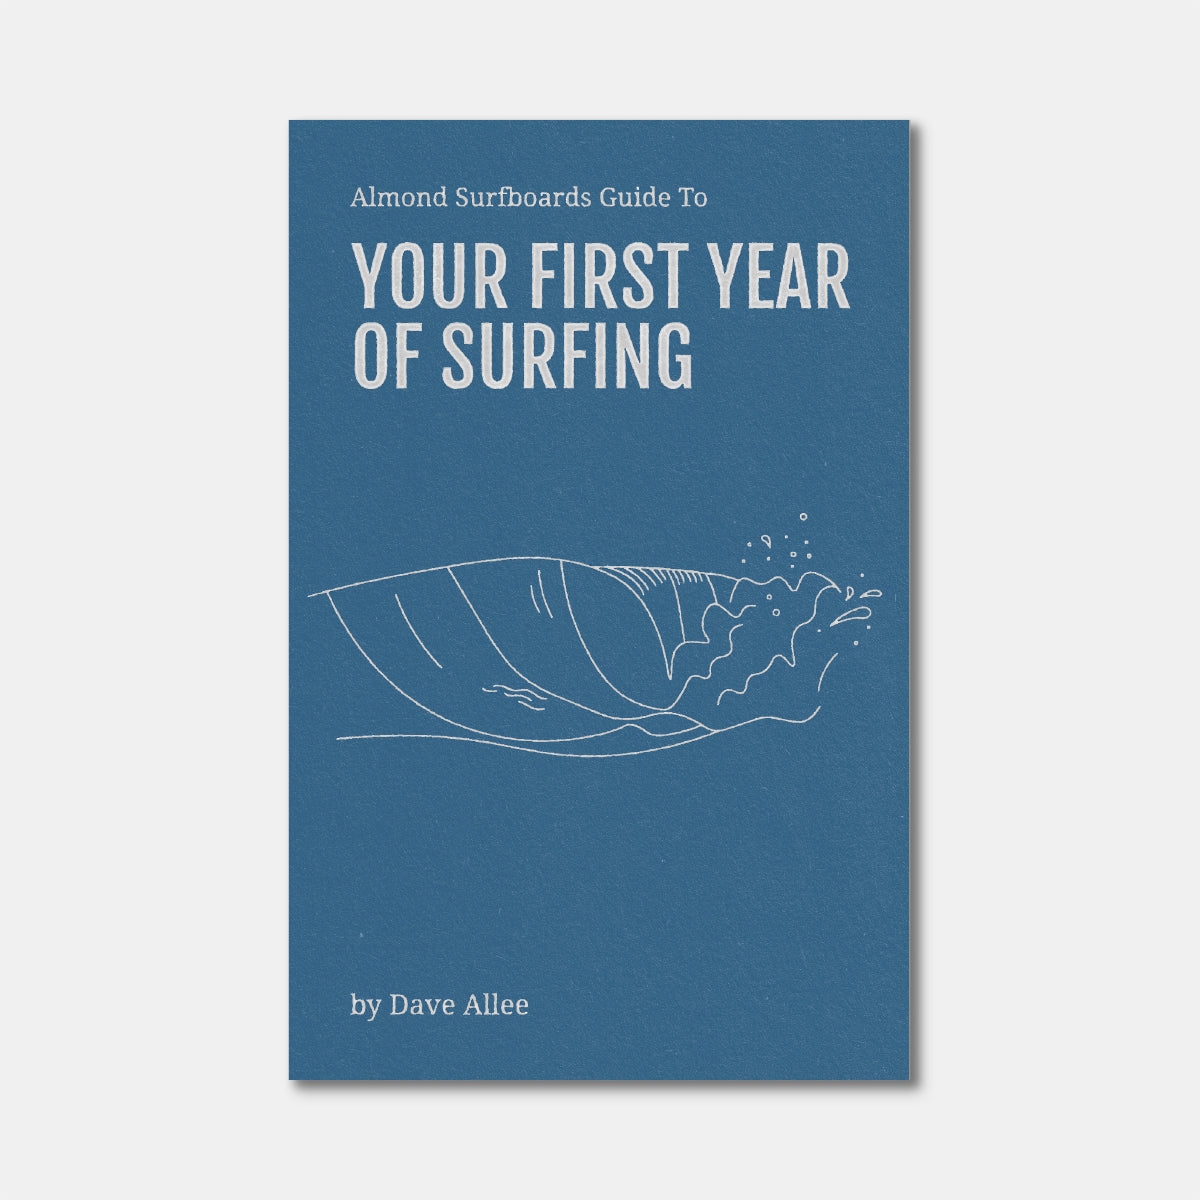 Almond's Guide to Your First Year of Surfing (Paperback)